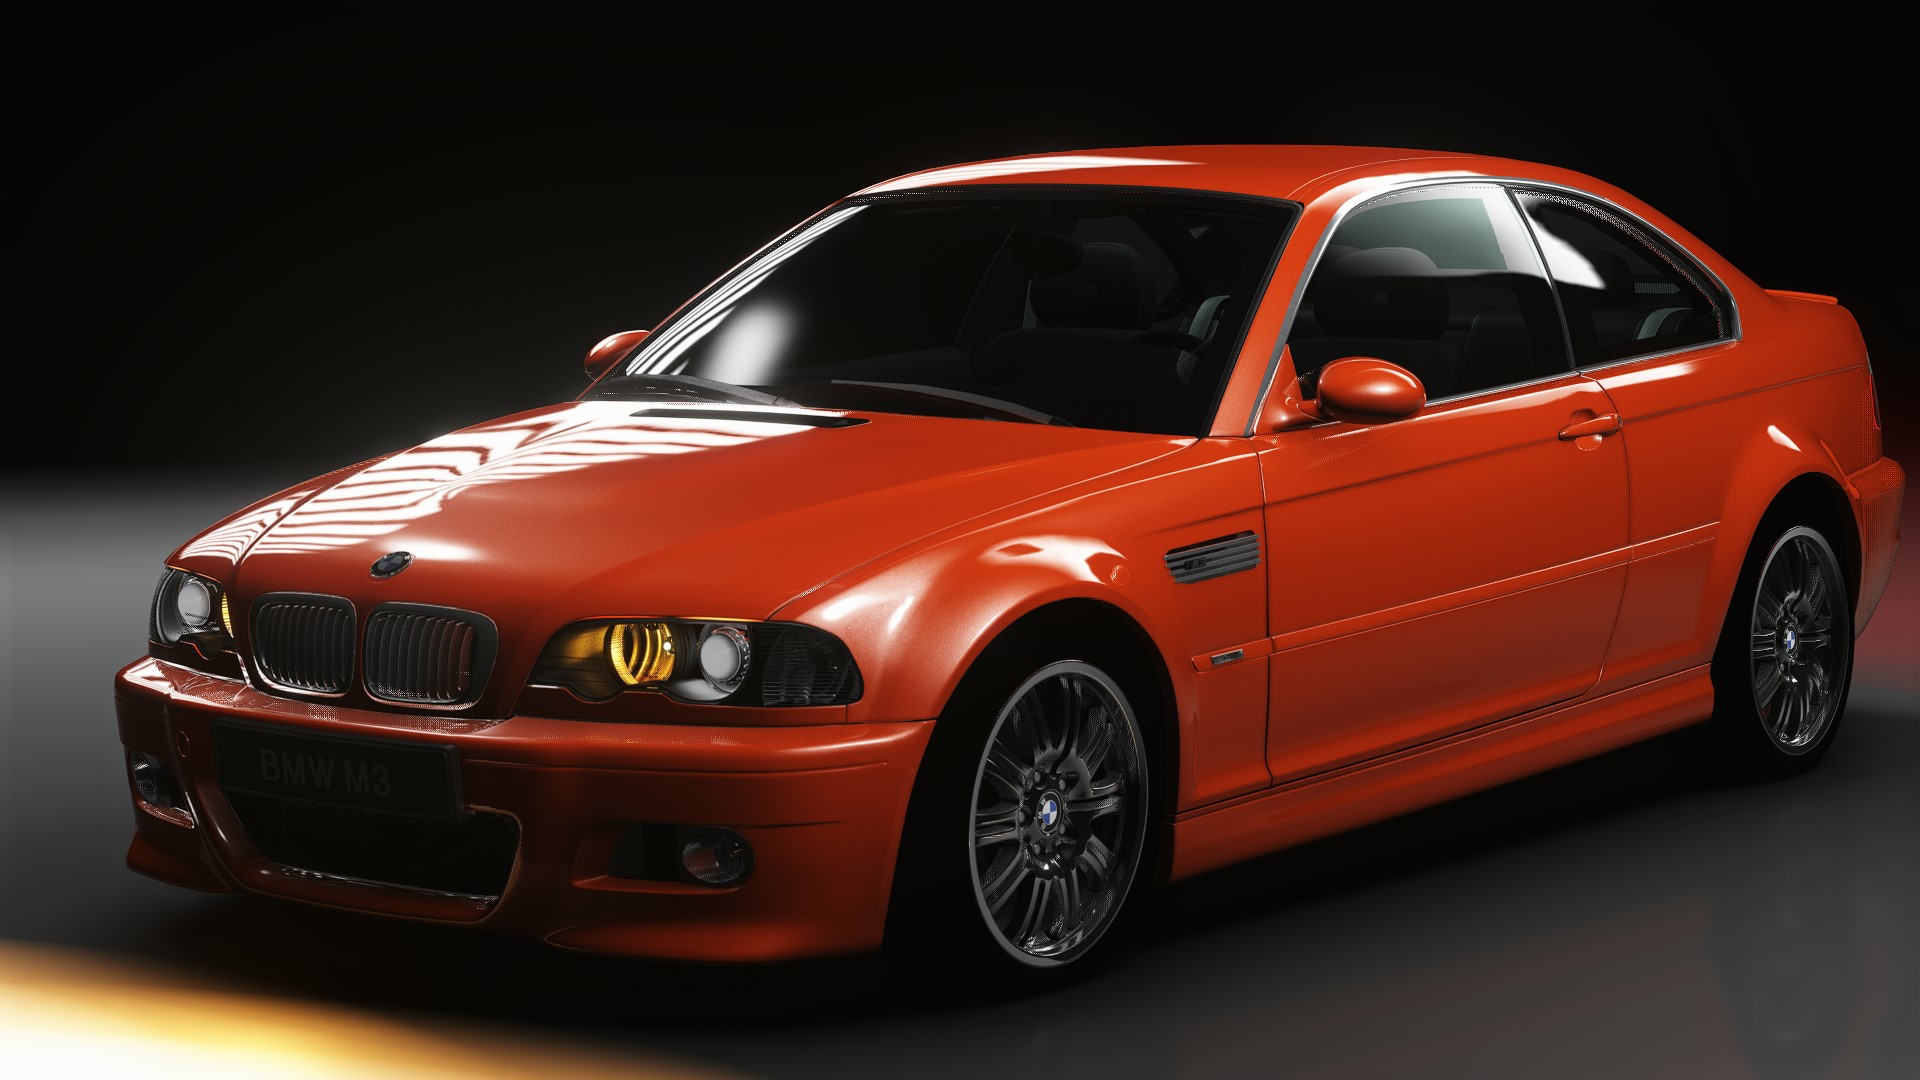 BMW M3 (E46) tweaked Preview Image